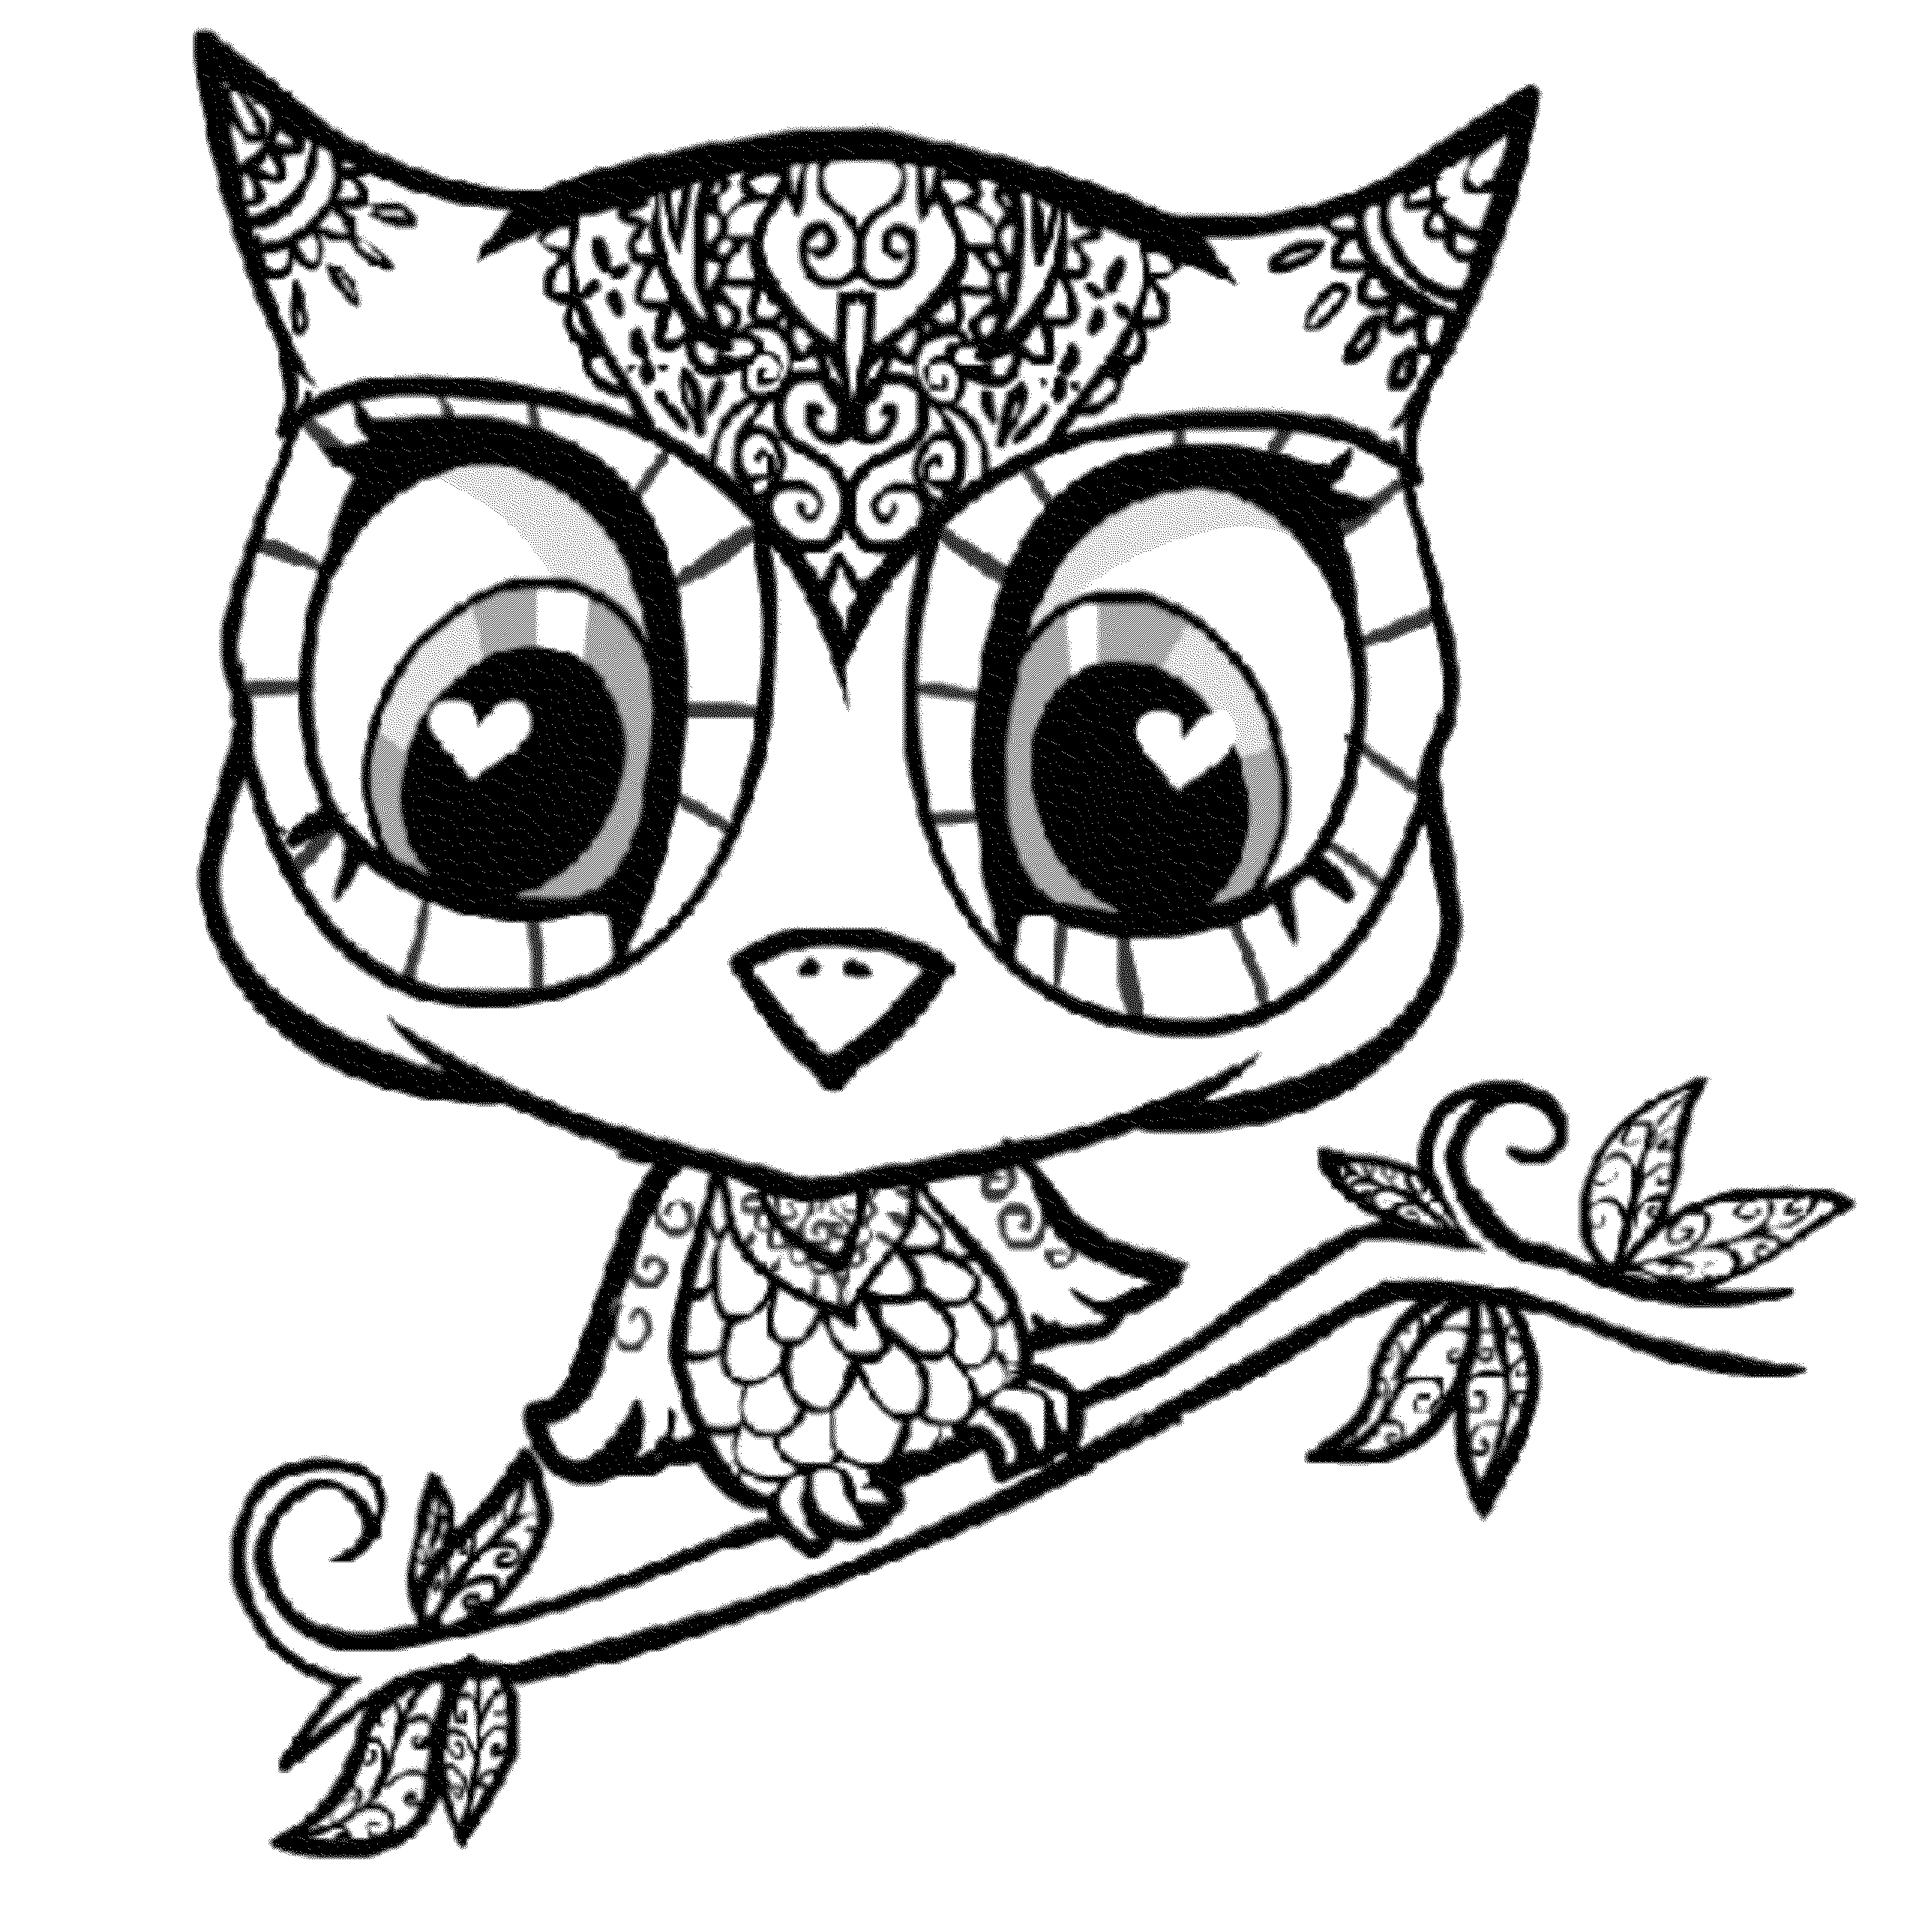 Coloring Pages Of Baby Owls - High Quality Coloring Pages - Coloring Library